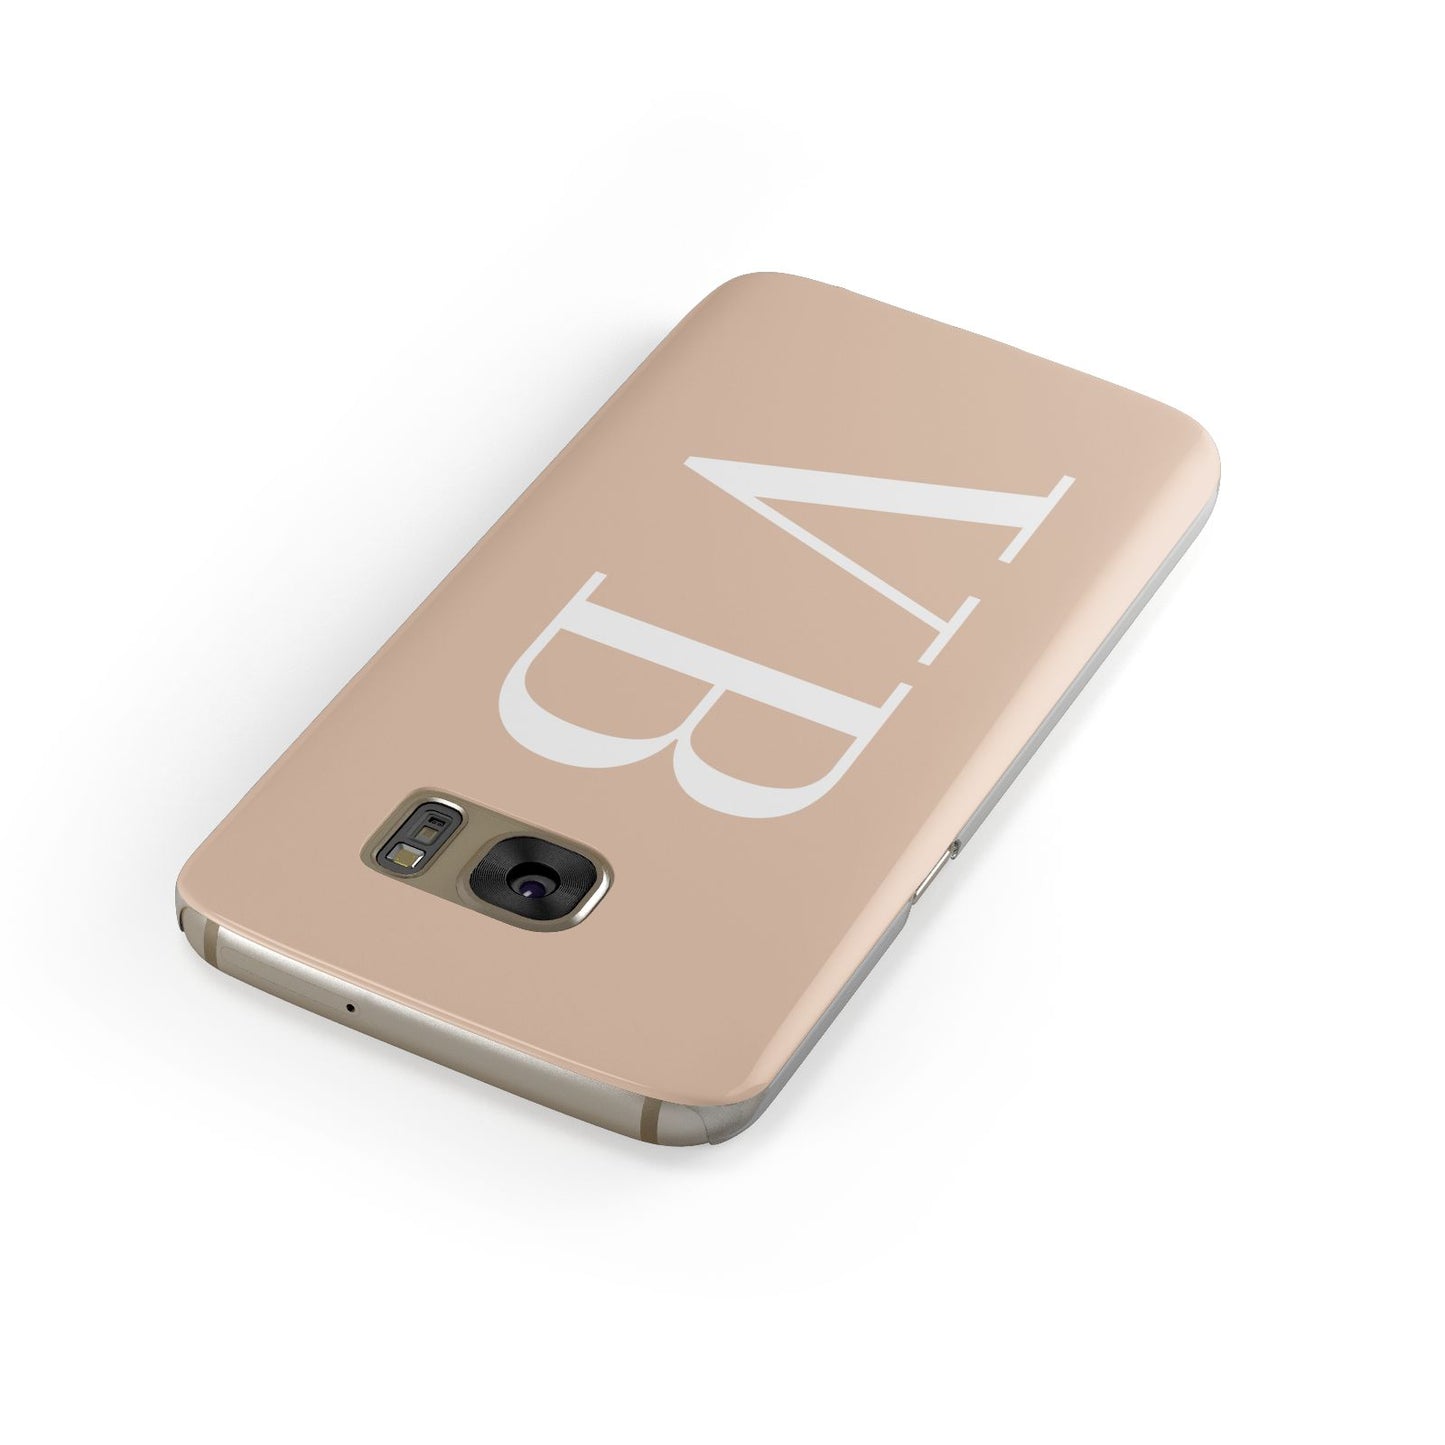 Nude And White Personalised Samsung Galaxy Case Front Close Up